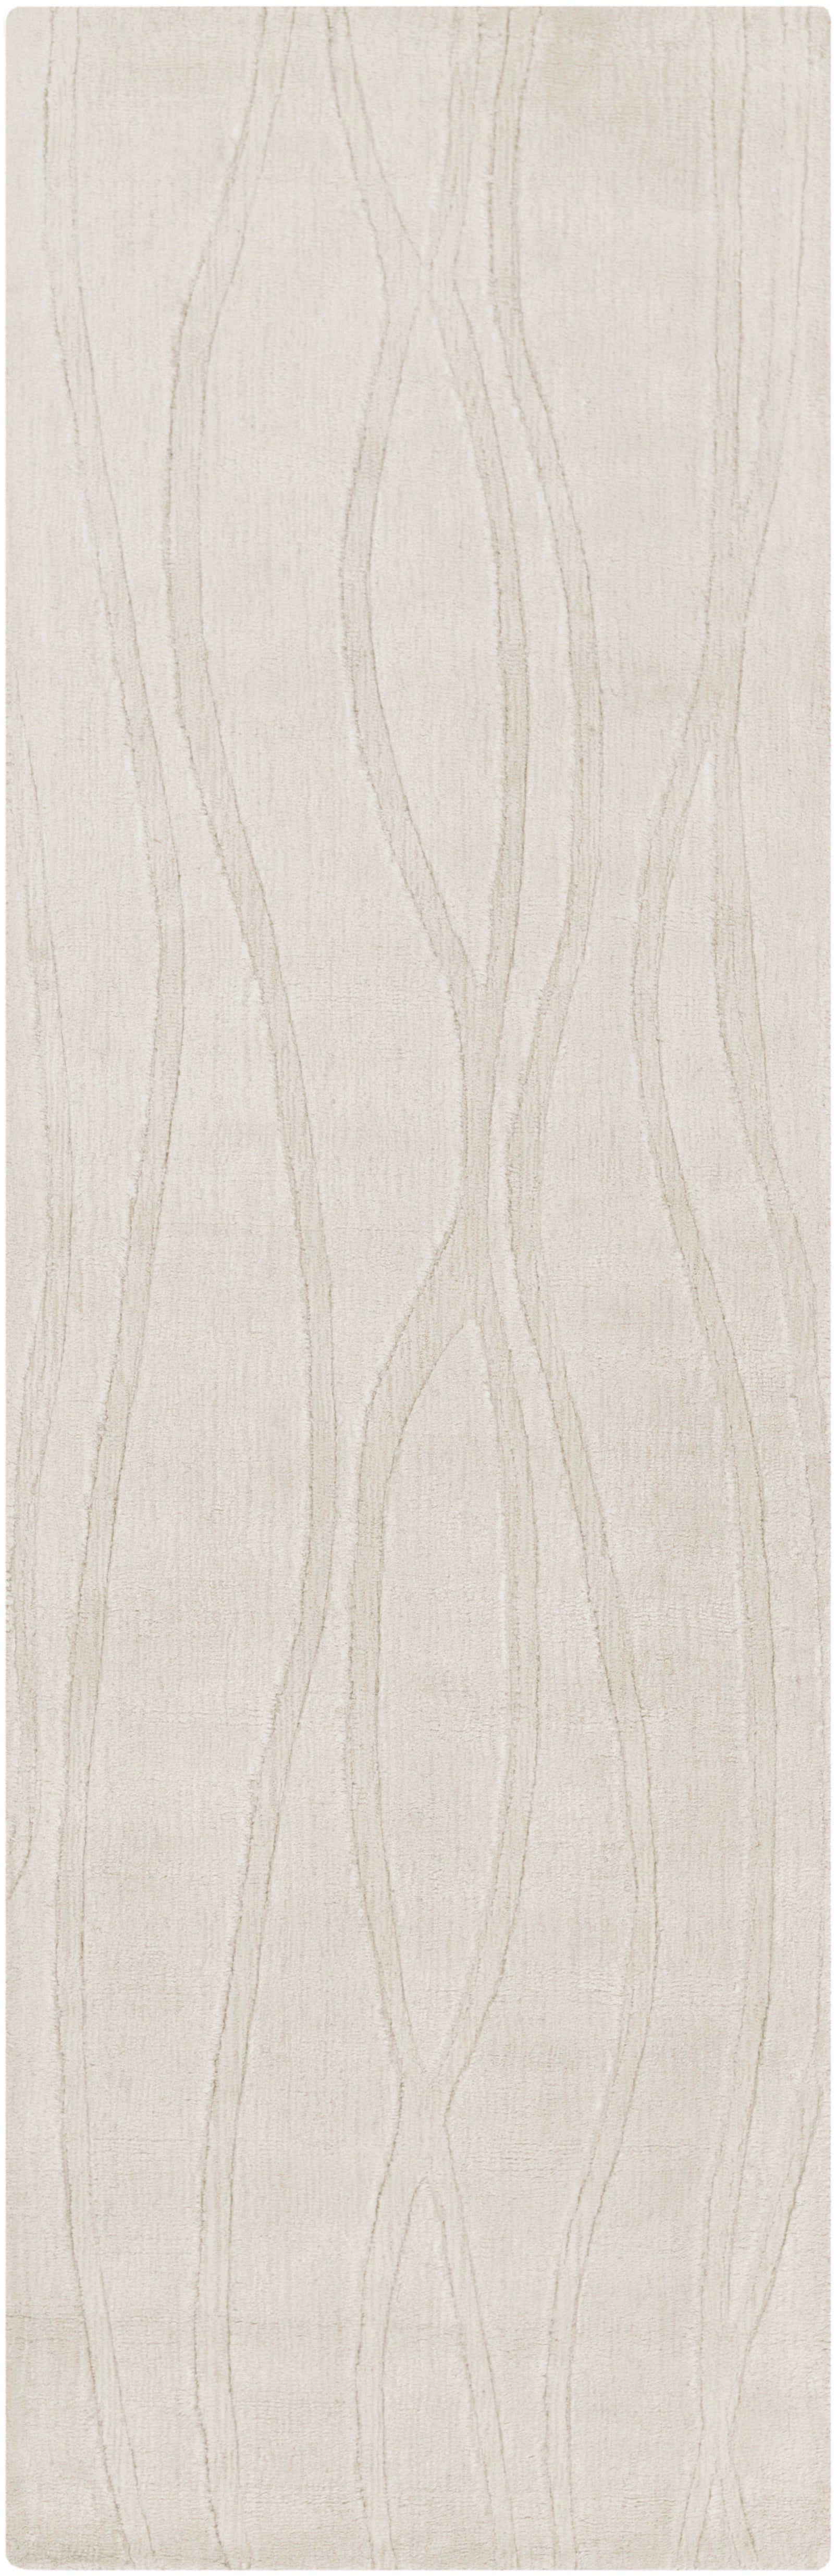 Surya Wave WVE1003 White Solids and Borders Area Rug